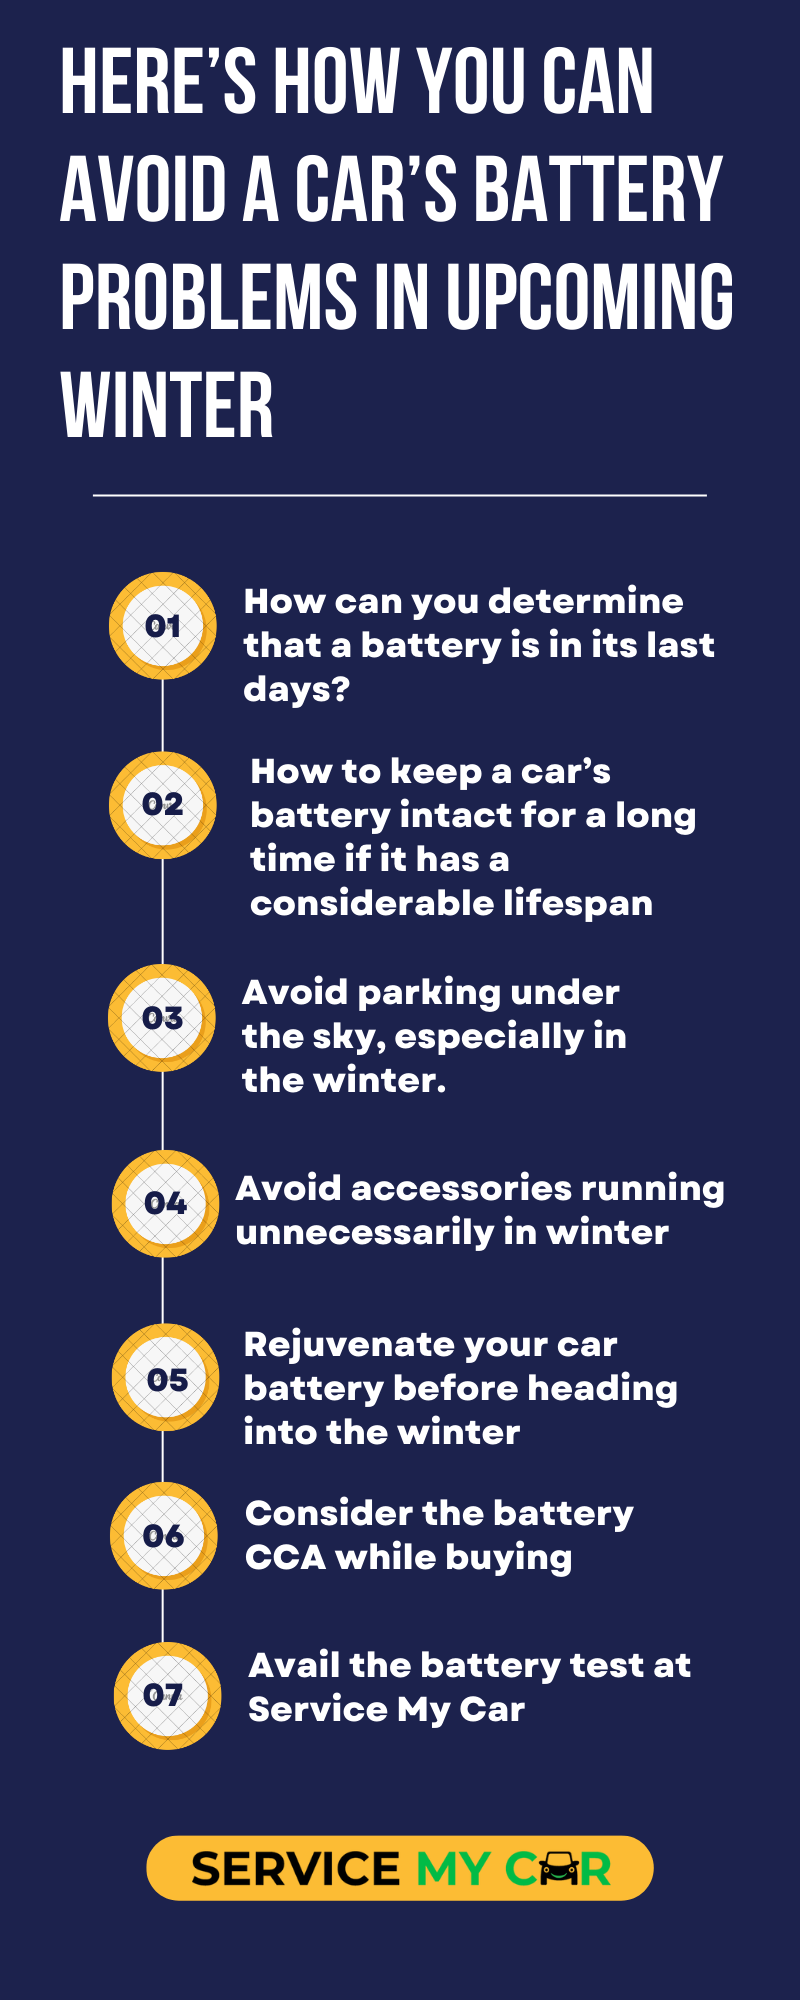 Here's how you can avoid A Car's Battery Problems in Upcoming Winter